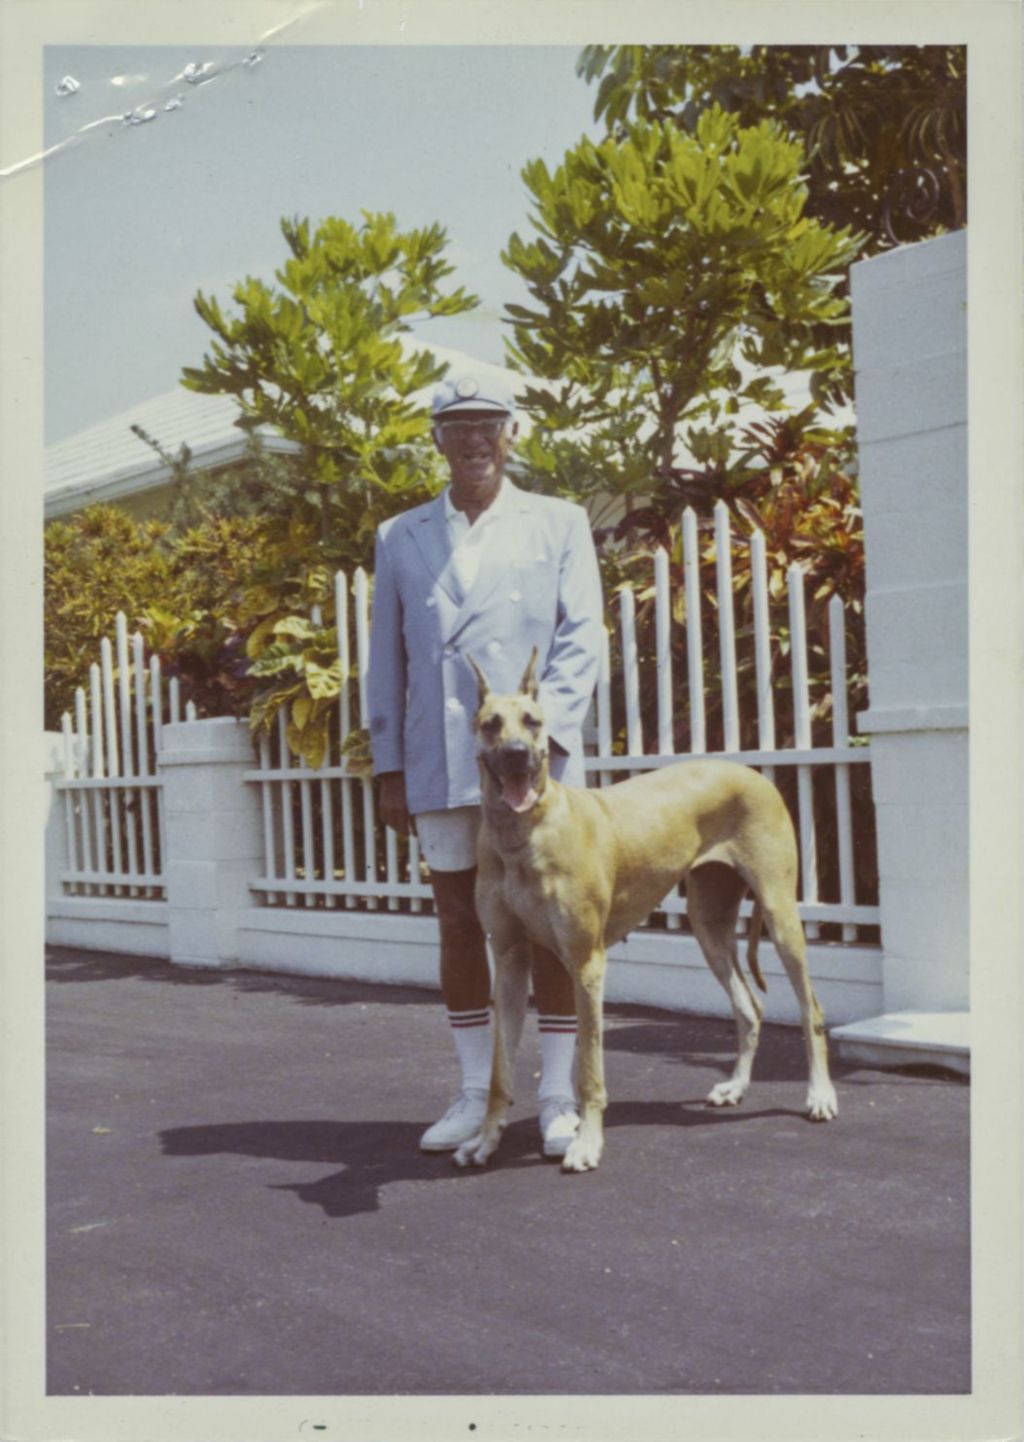 Miniature of Harold "Harry" Ash and dog